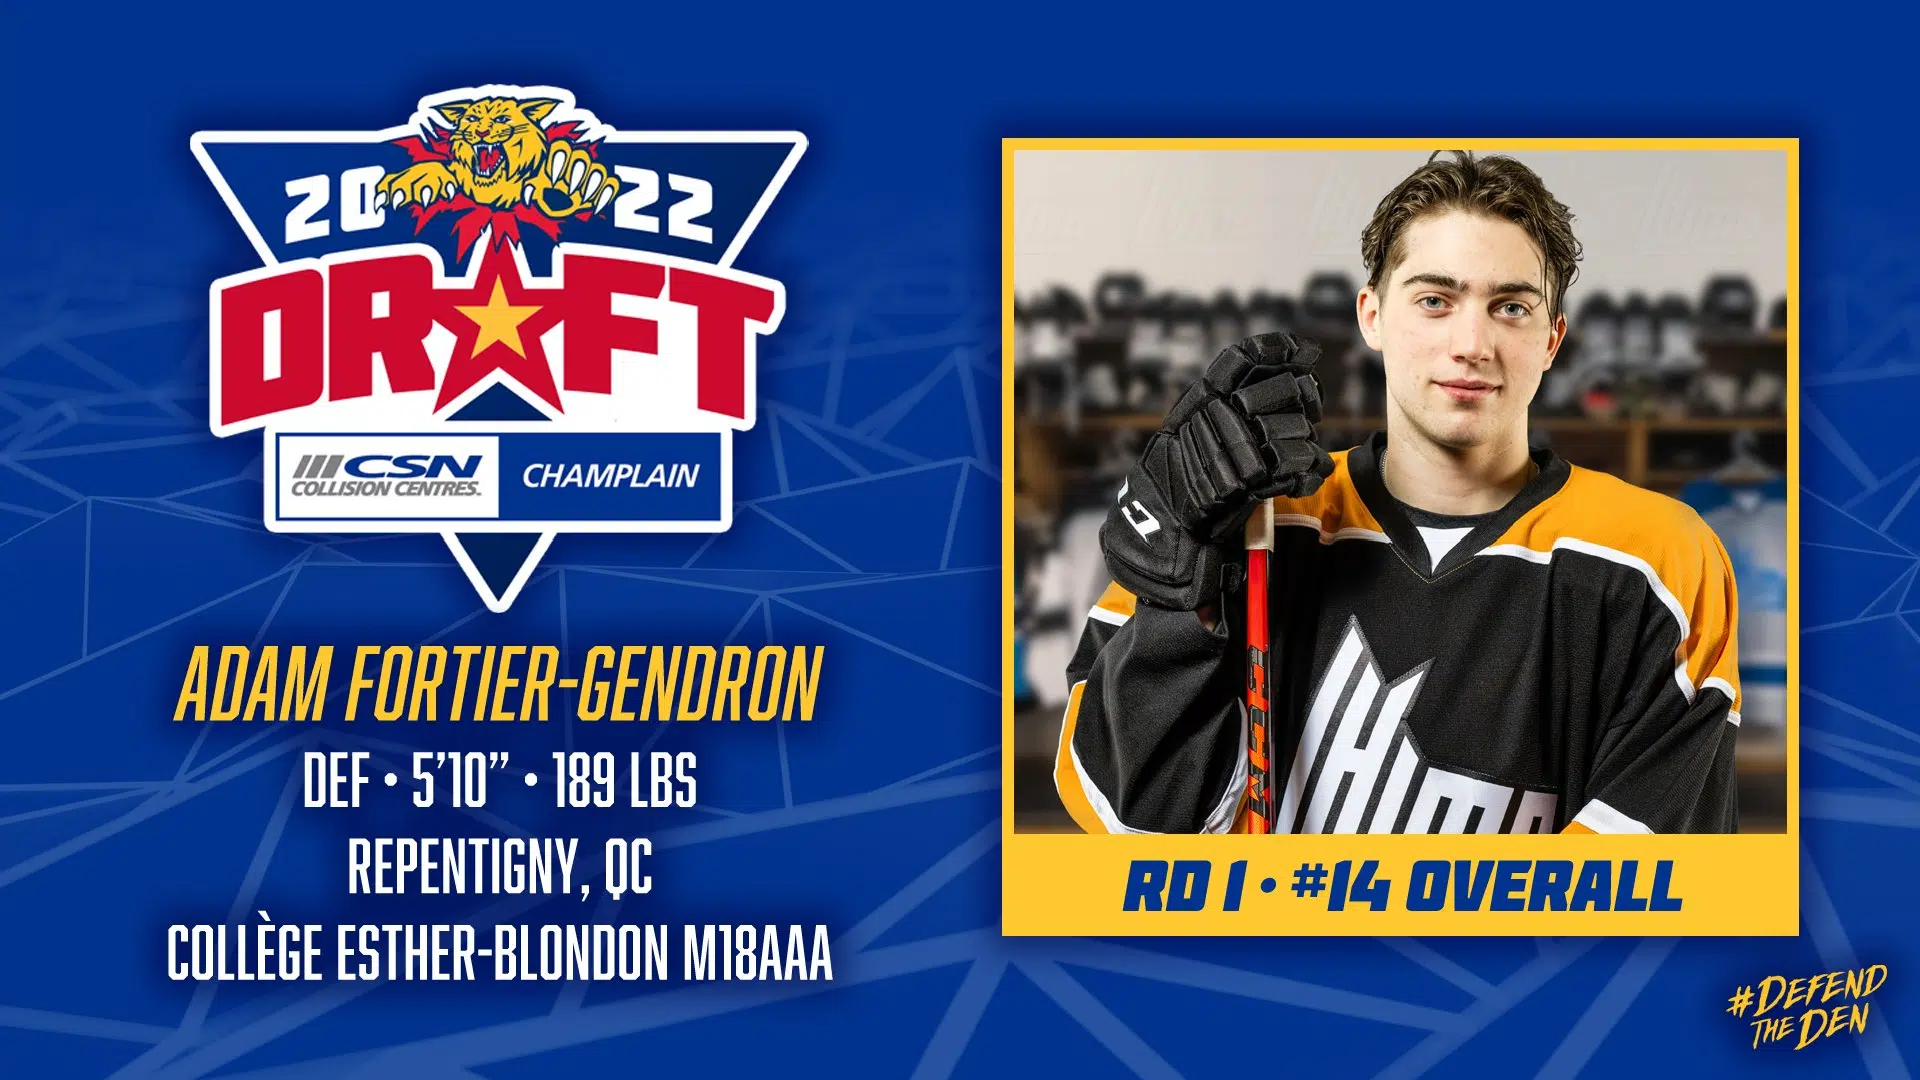 Wildcats Select 14 Players In Entry Draft